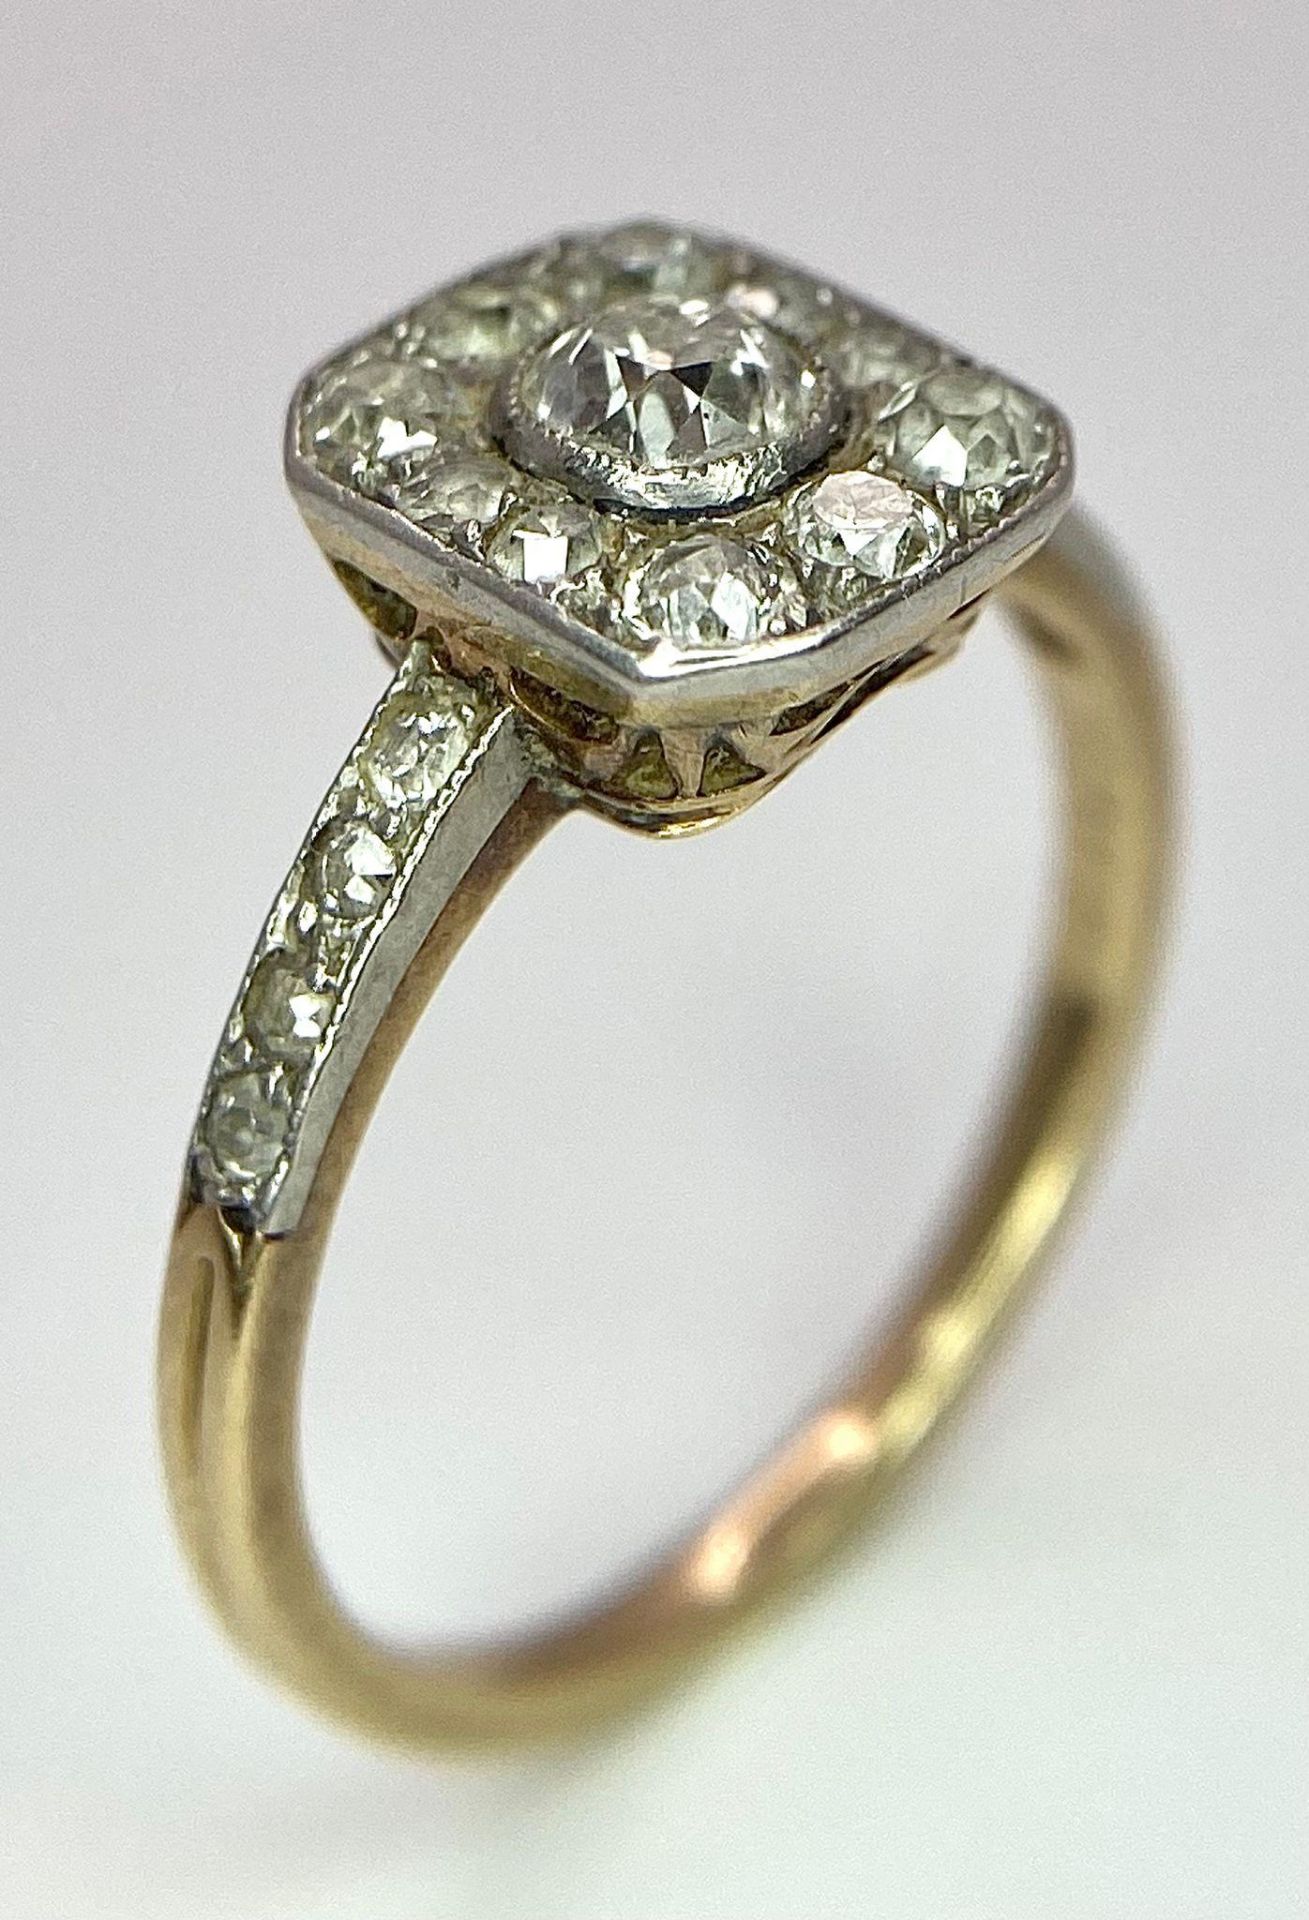 A 9 K yellow gold ring with an ART DECO style diamond cluster and more diamonds on the shoulders, - Image 4 of 8